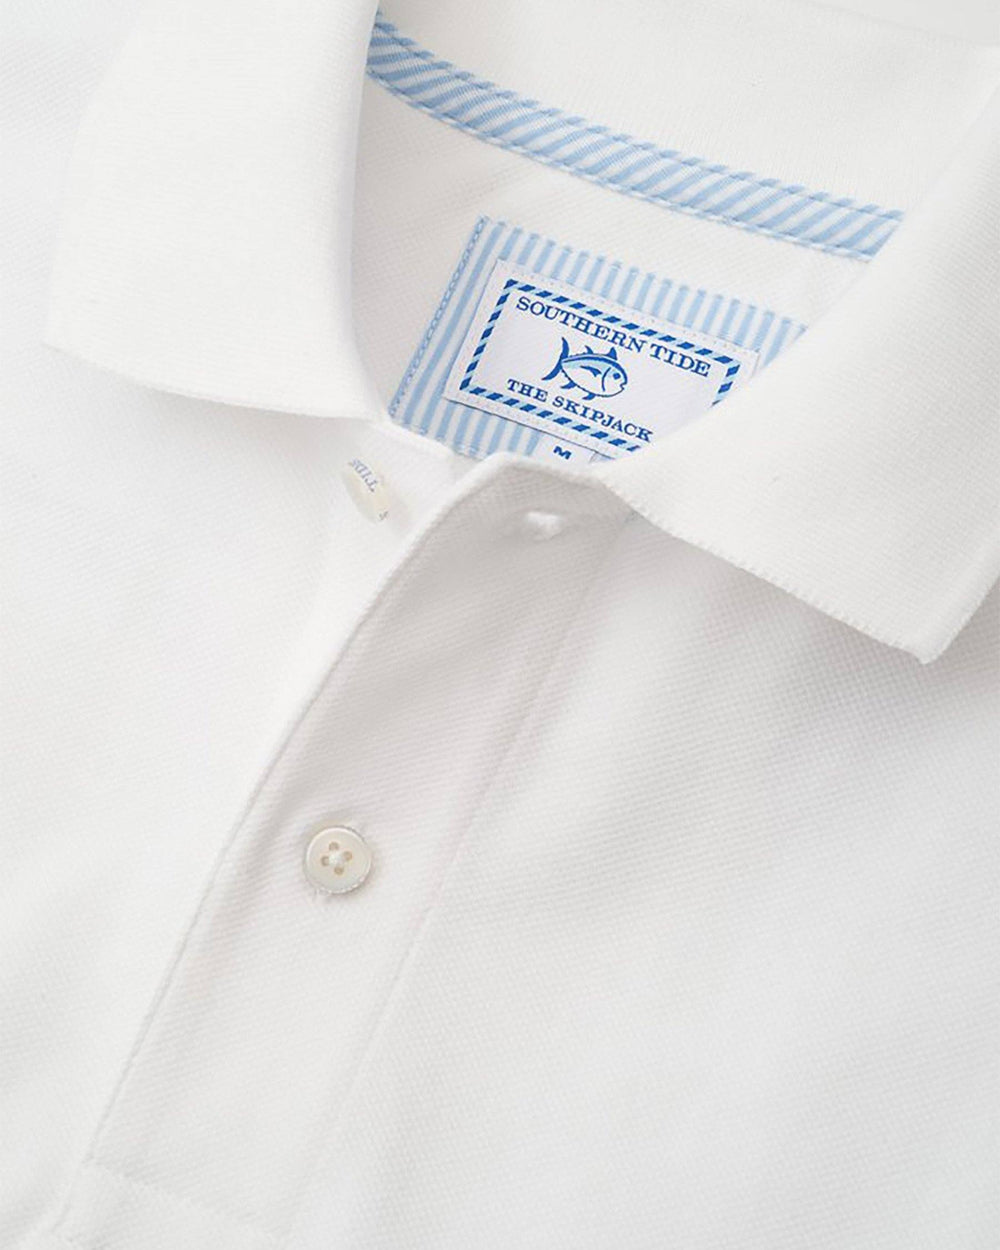 The detail of the Men's White Tennessee Vols Pique Polo Shirt by Southern Tide - Classic White